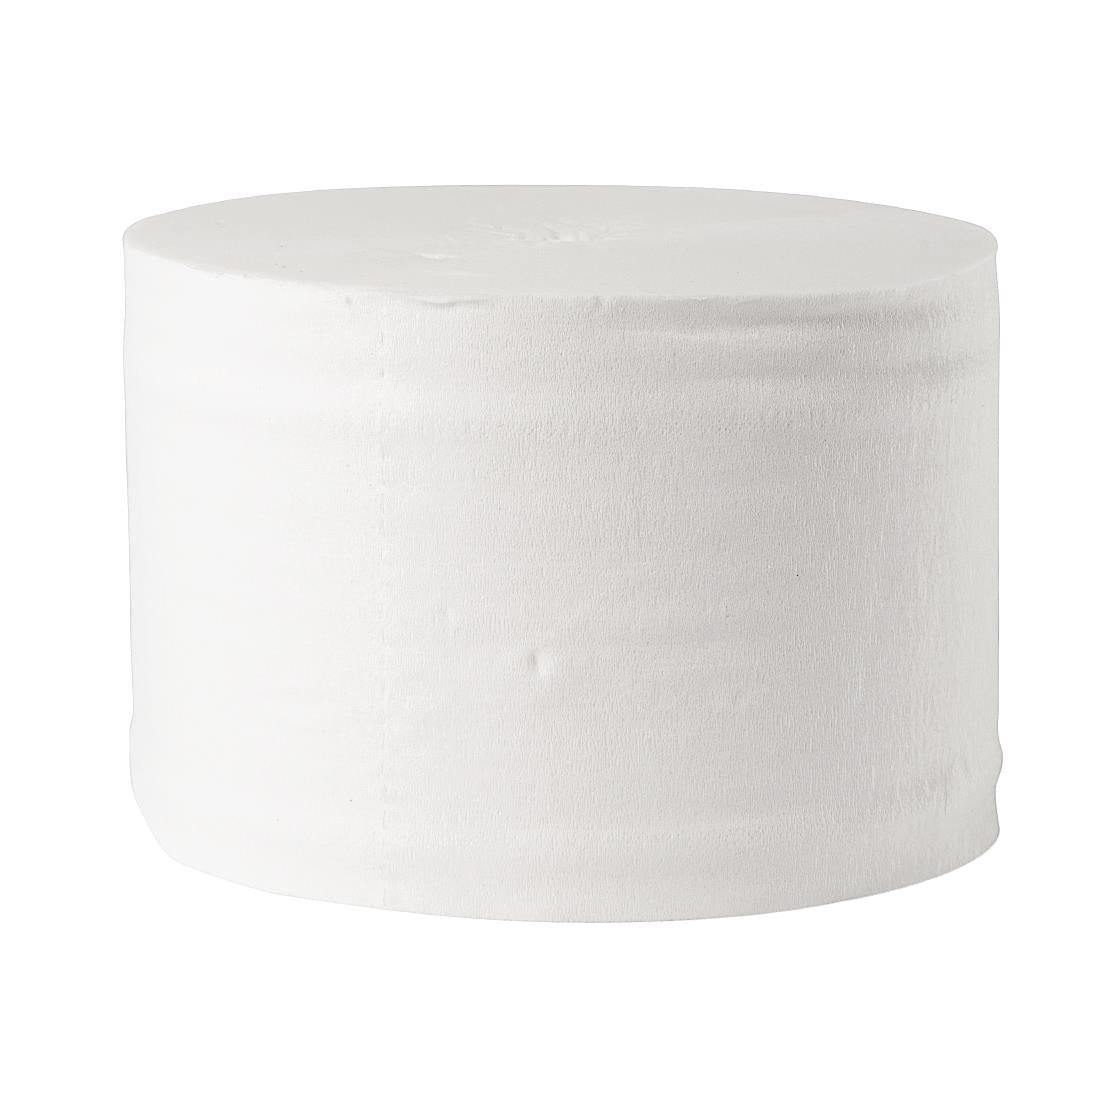 Jantex Compact Coreless Toilet Paper 2-Ply 96m (Pack of 36) JD Catering Equipment Solutions Ltd